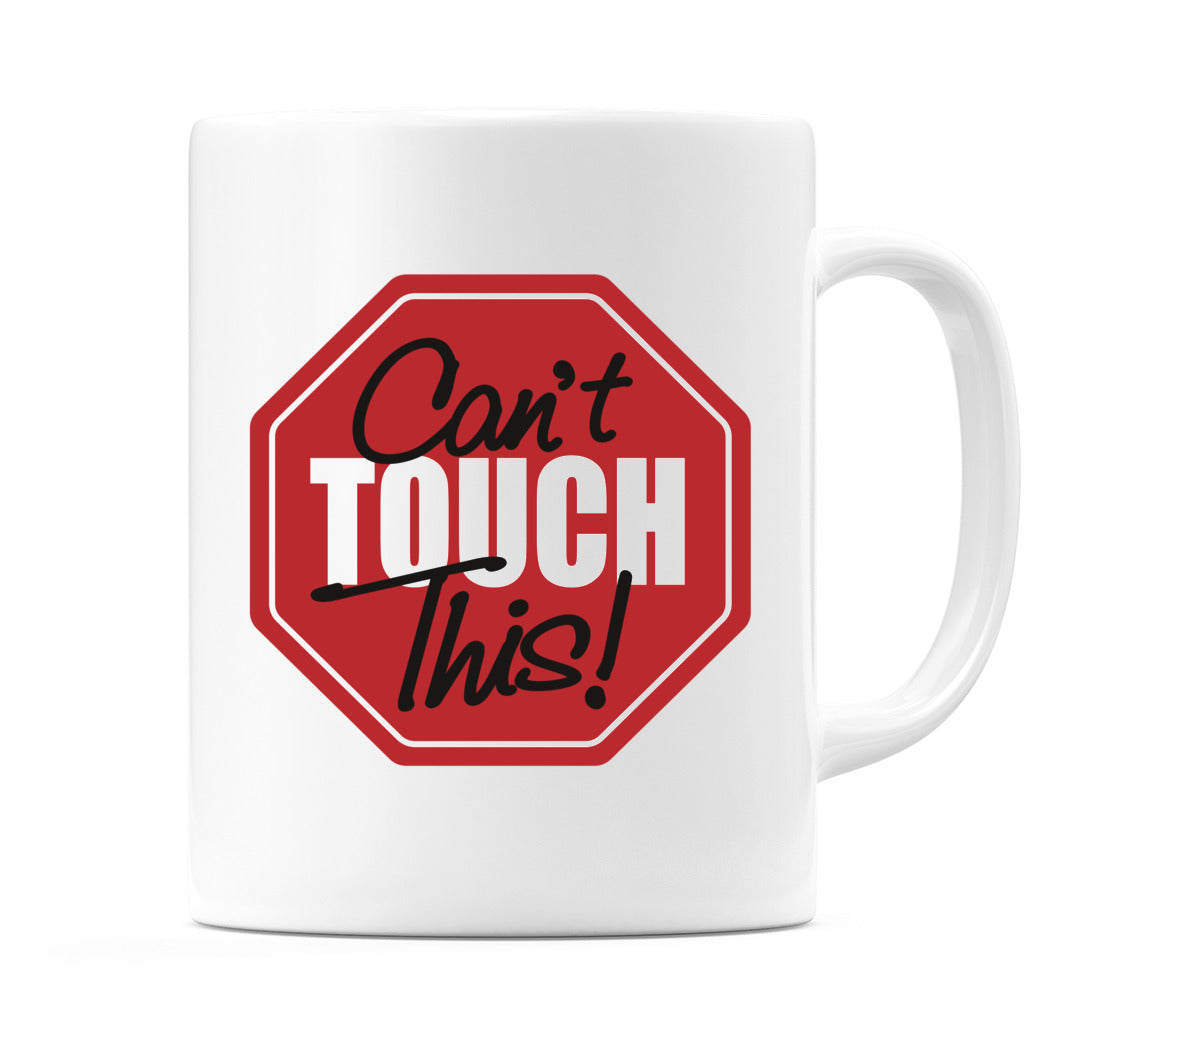 Can't Touch This! Mug